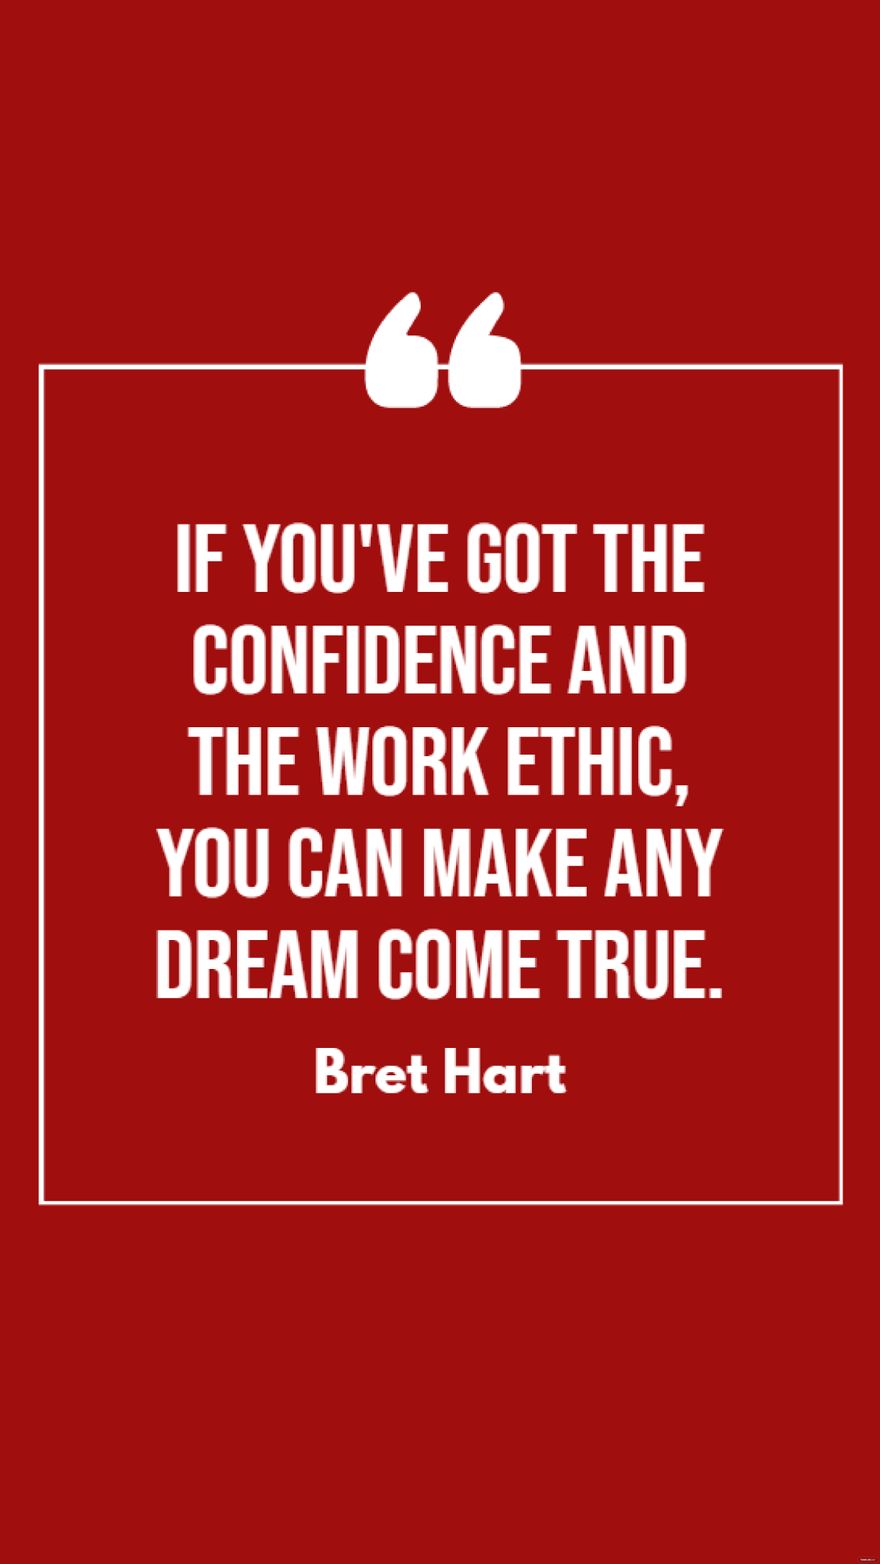 Bret Hart - If you've got the confidence and the work ethic, you can make any dream come true. in JPG